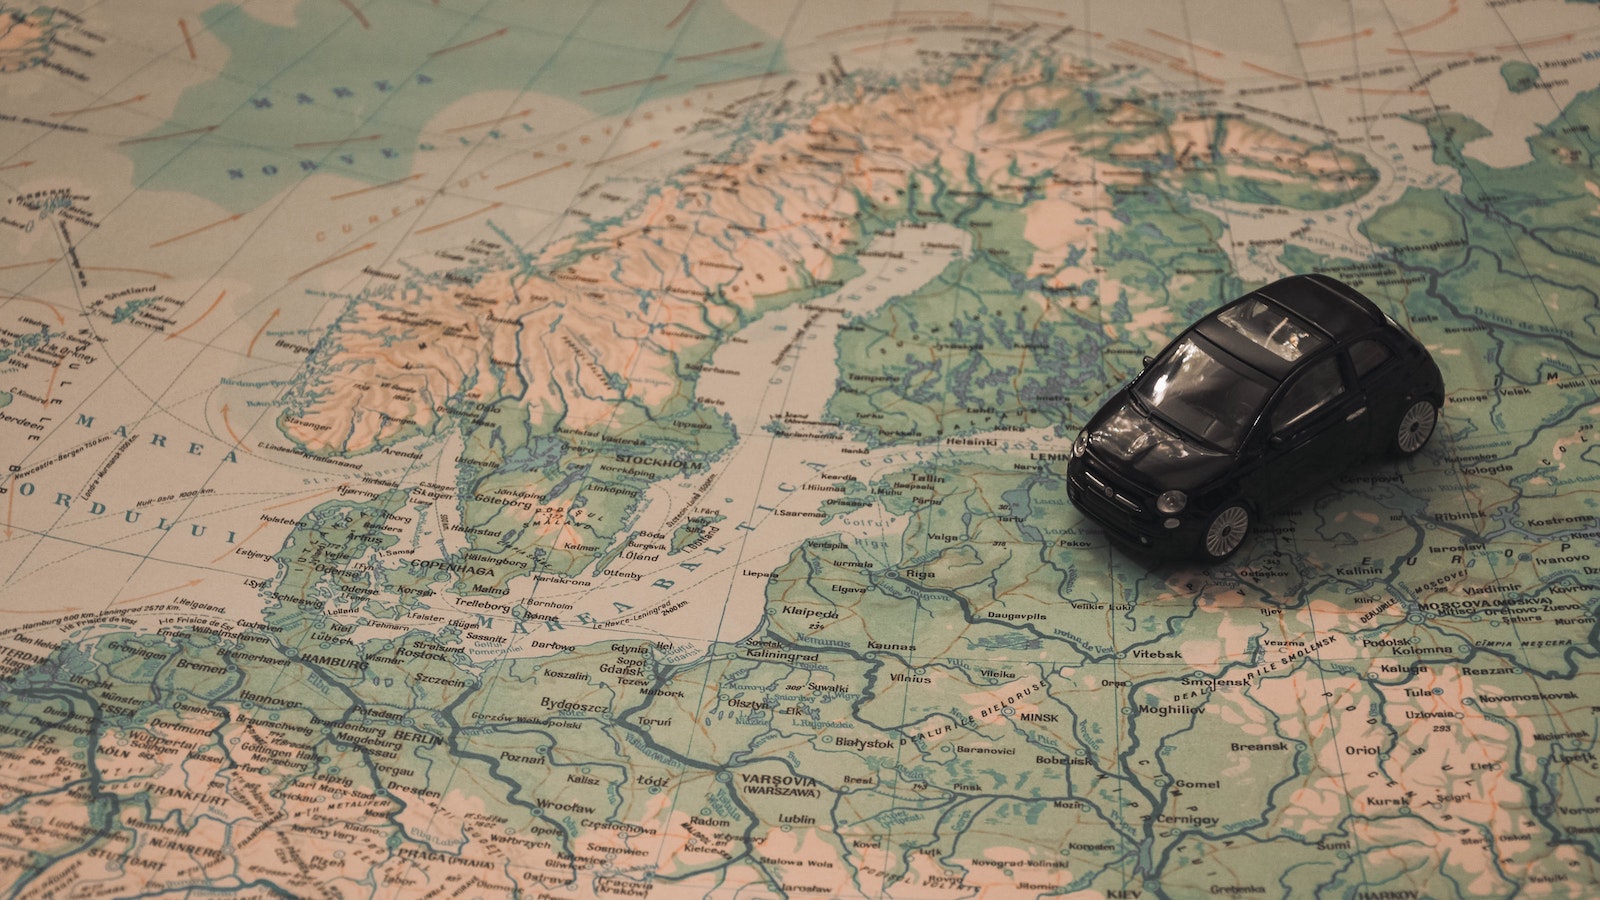 Toy car on map of Europe